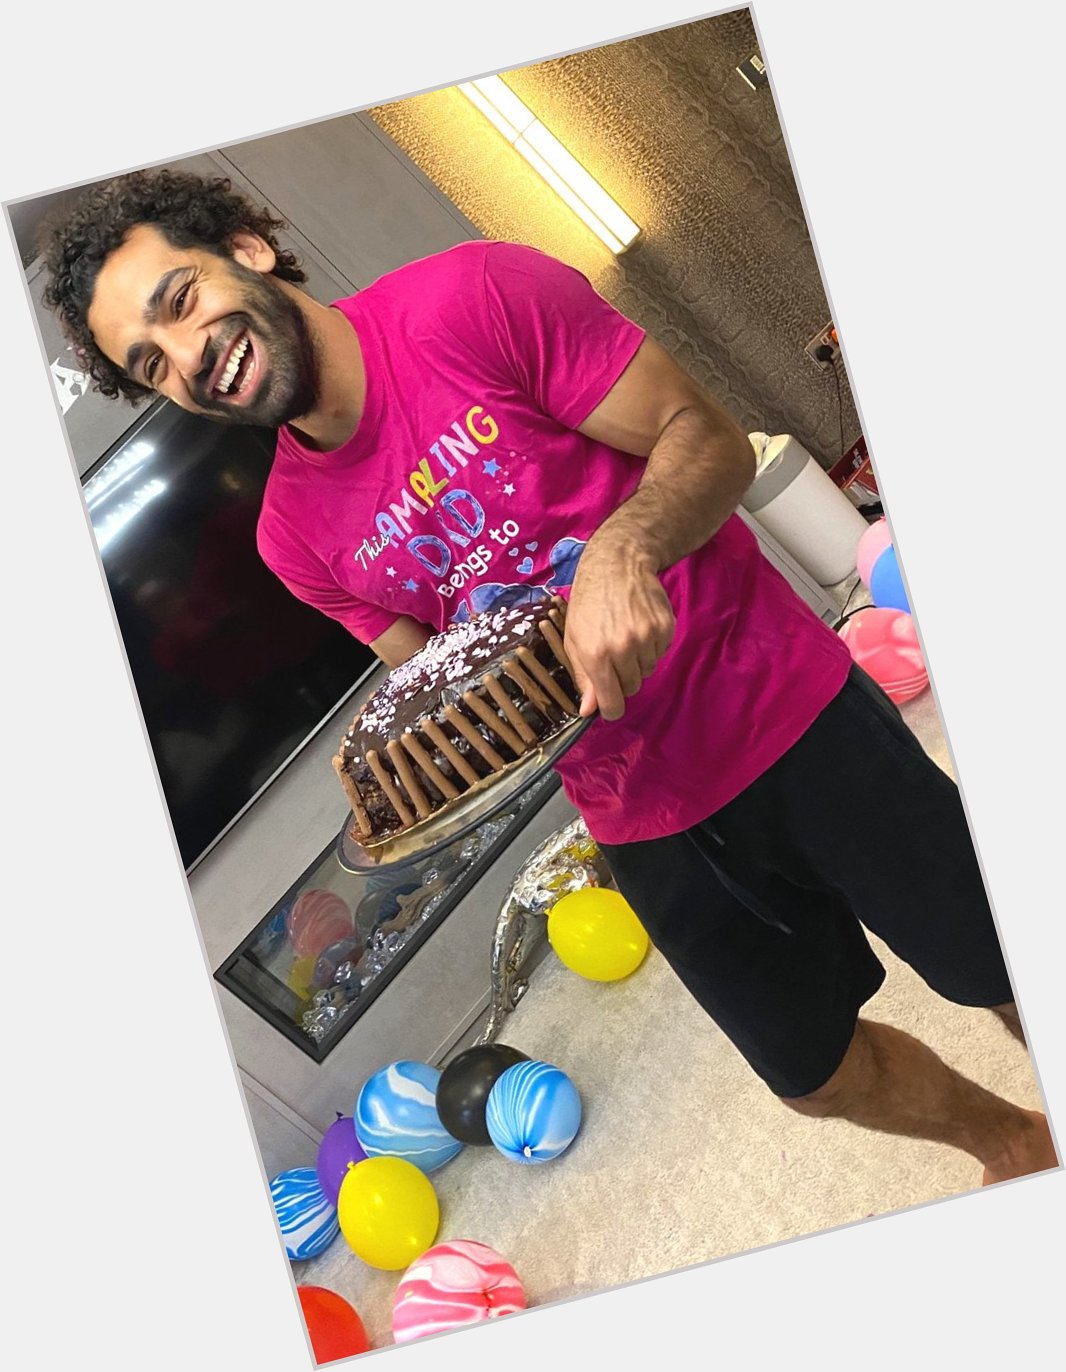 HAPPY BIRTHDAY TO YOU SALAH I WISH YOU ALL THE BEST IN YOUR LIFE   KING   __  